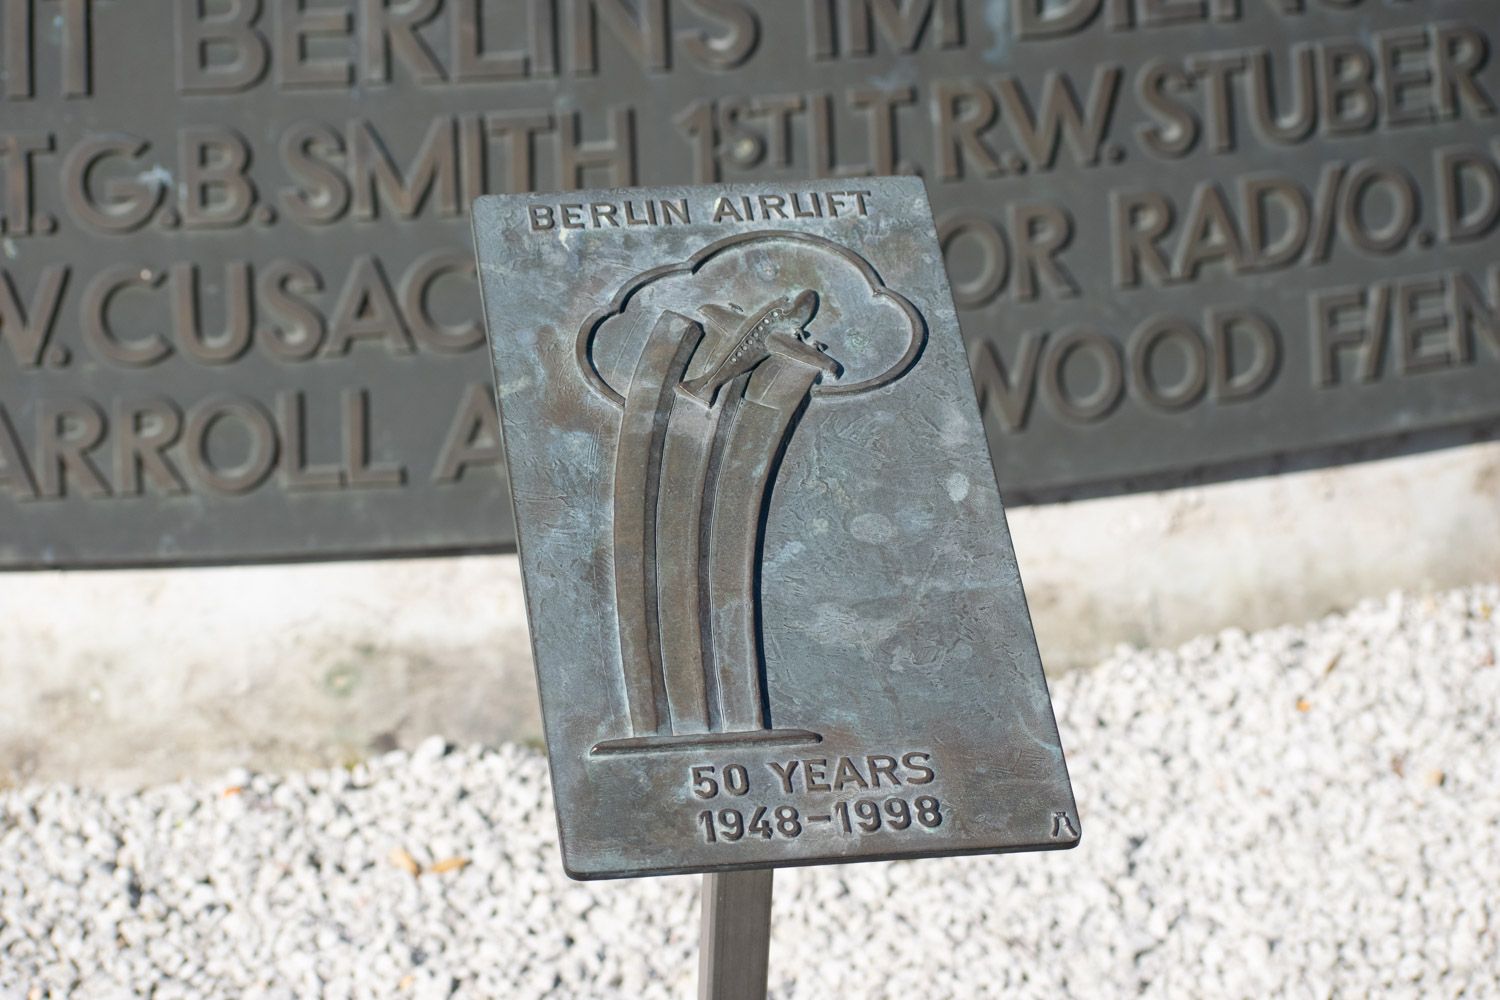 A memorial for the Berlin Airlift.